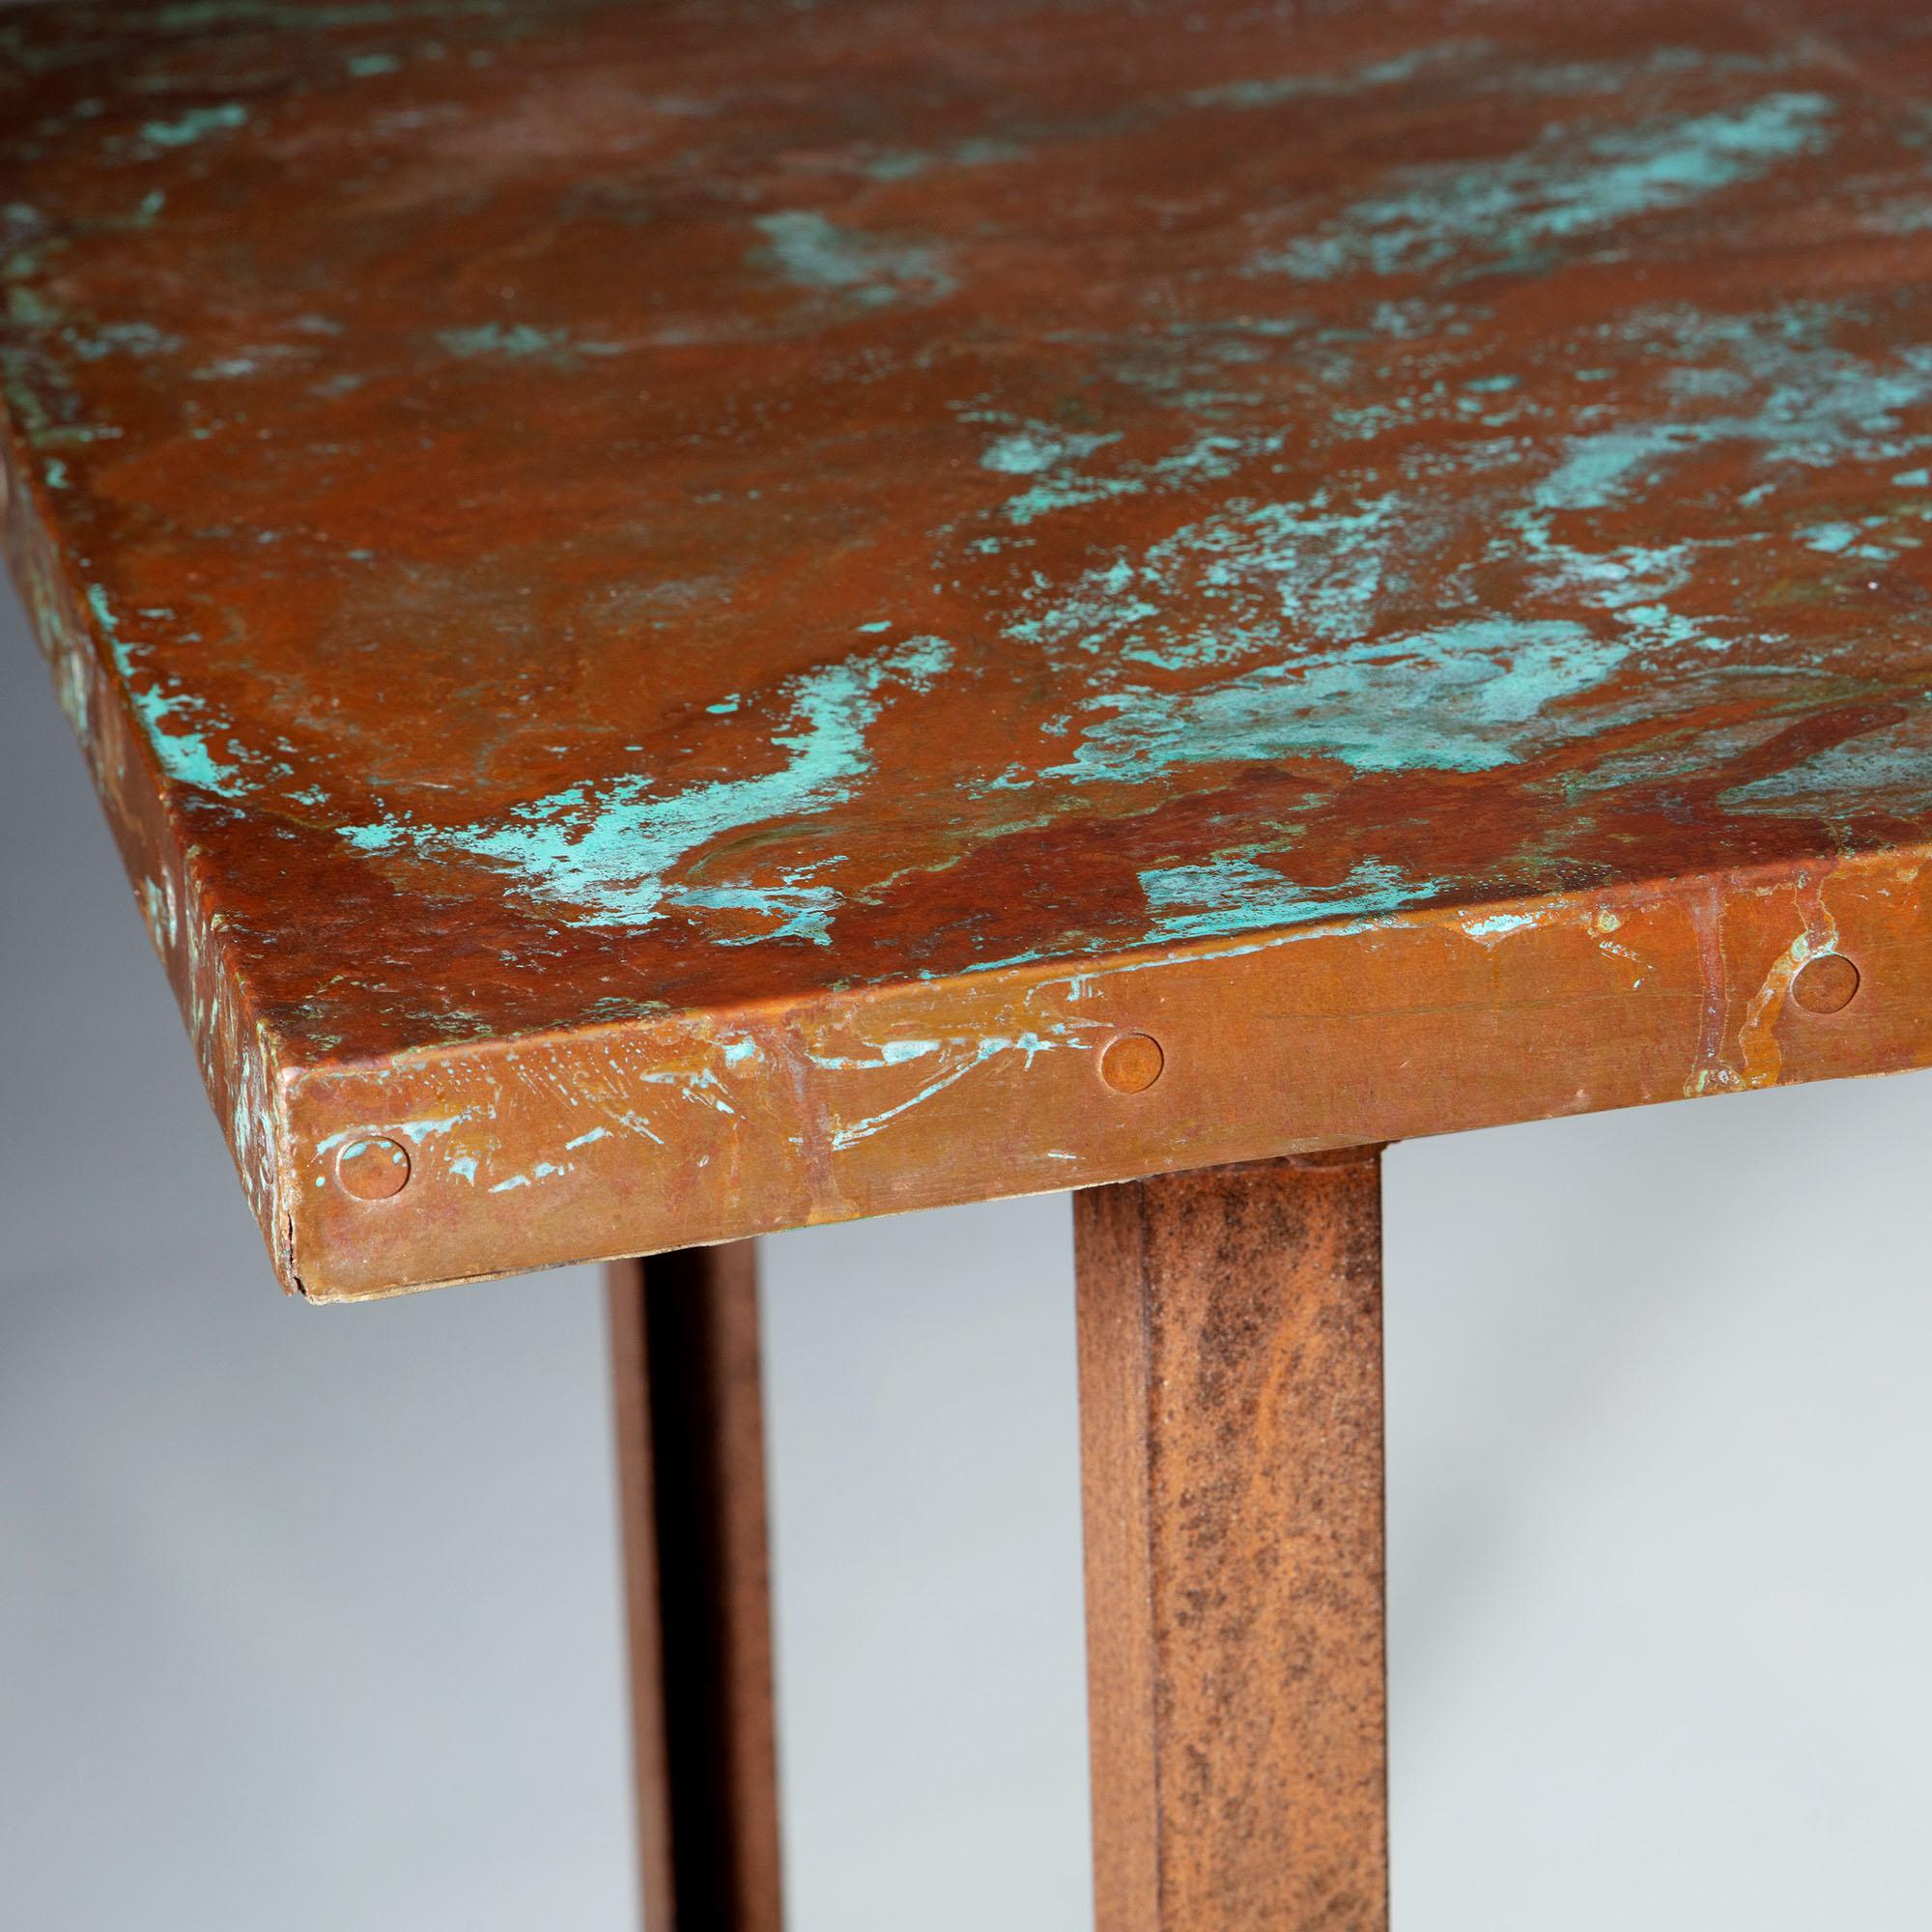 Large 20th Century French Copper Metal Table with Verdigris Patination 6